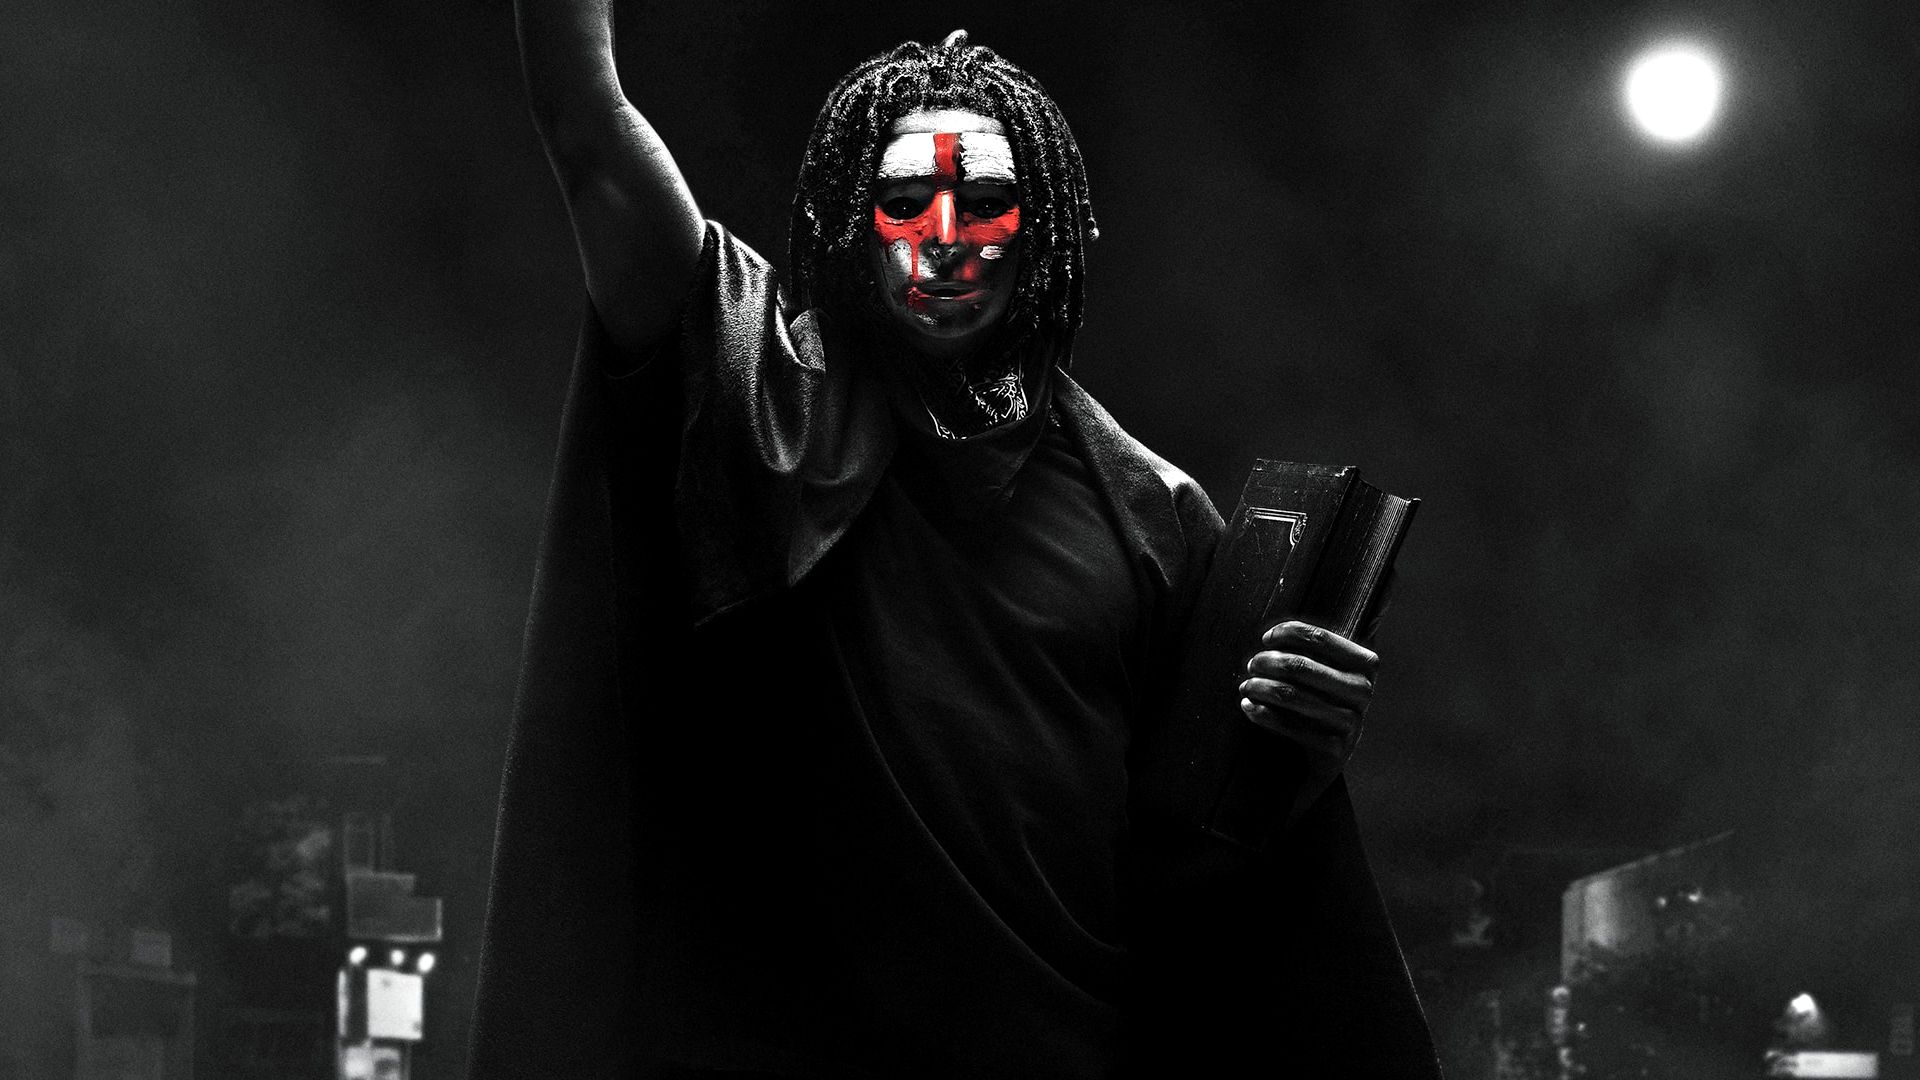 The First Purge background